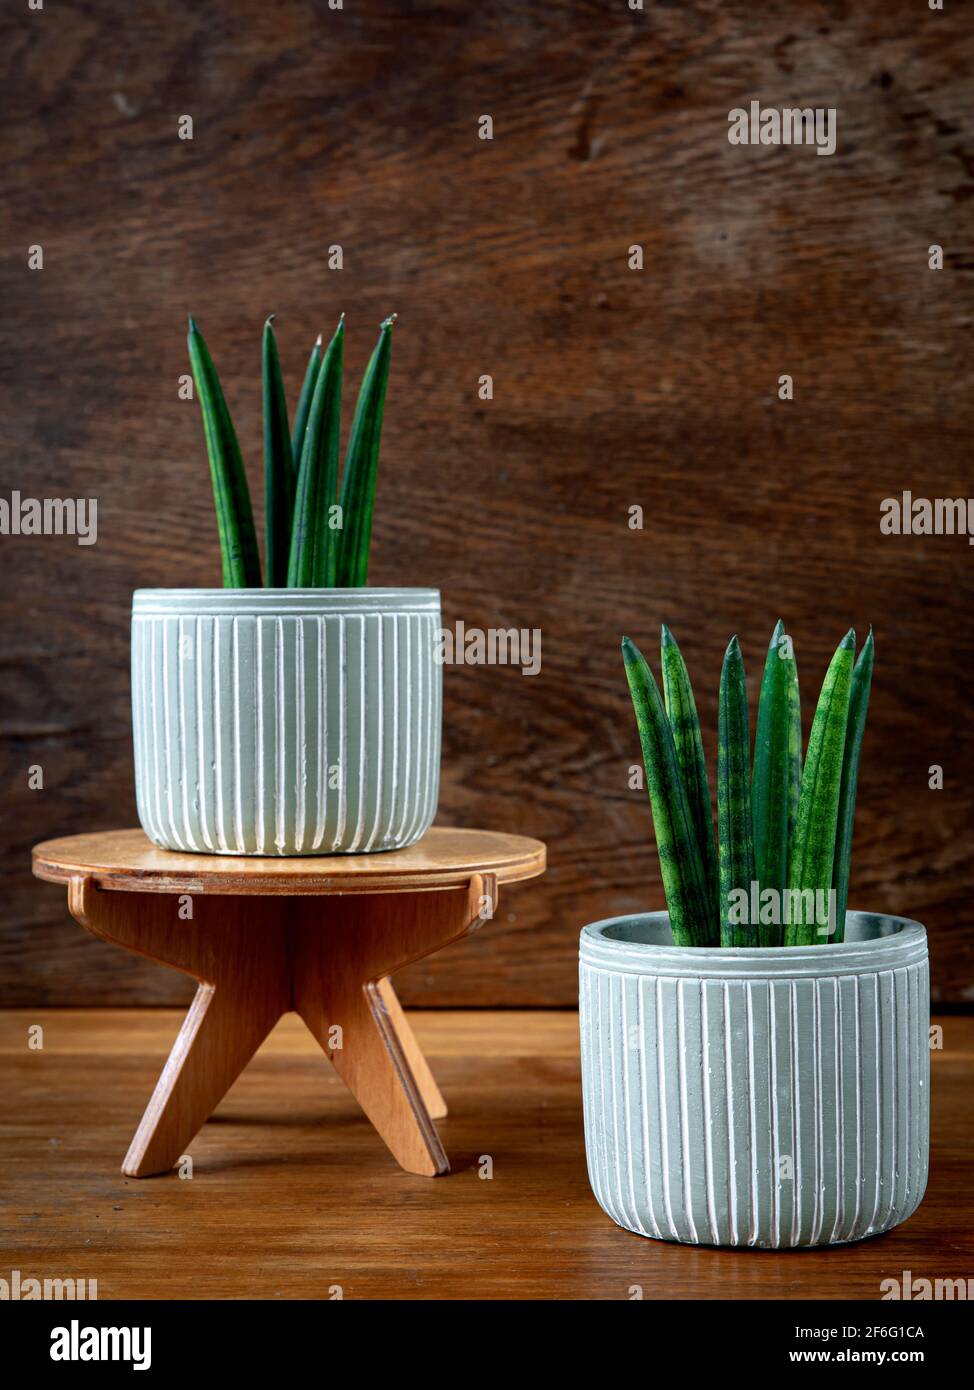 Interior decoration and houseplant care concept. Sansevieria cylindrica or snake plant in ceramic flower pots on rustic wooden background Stock Photo